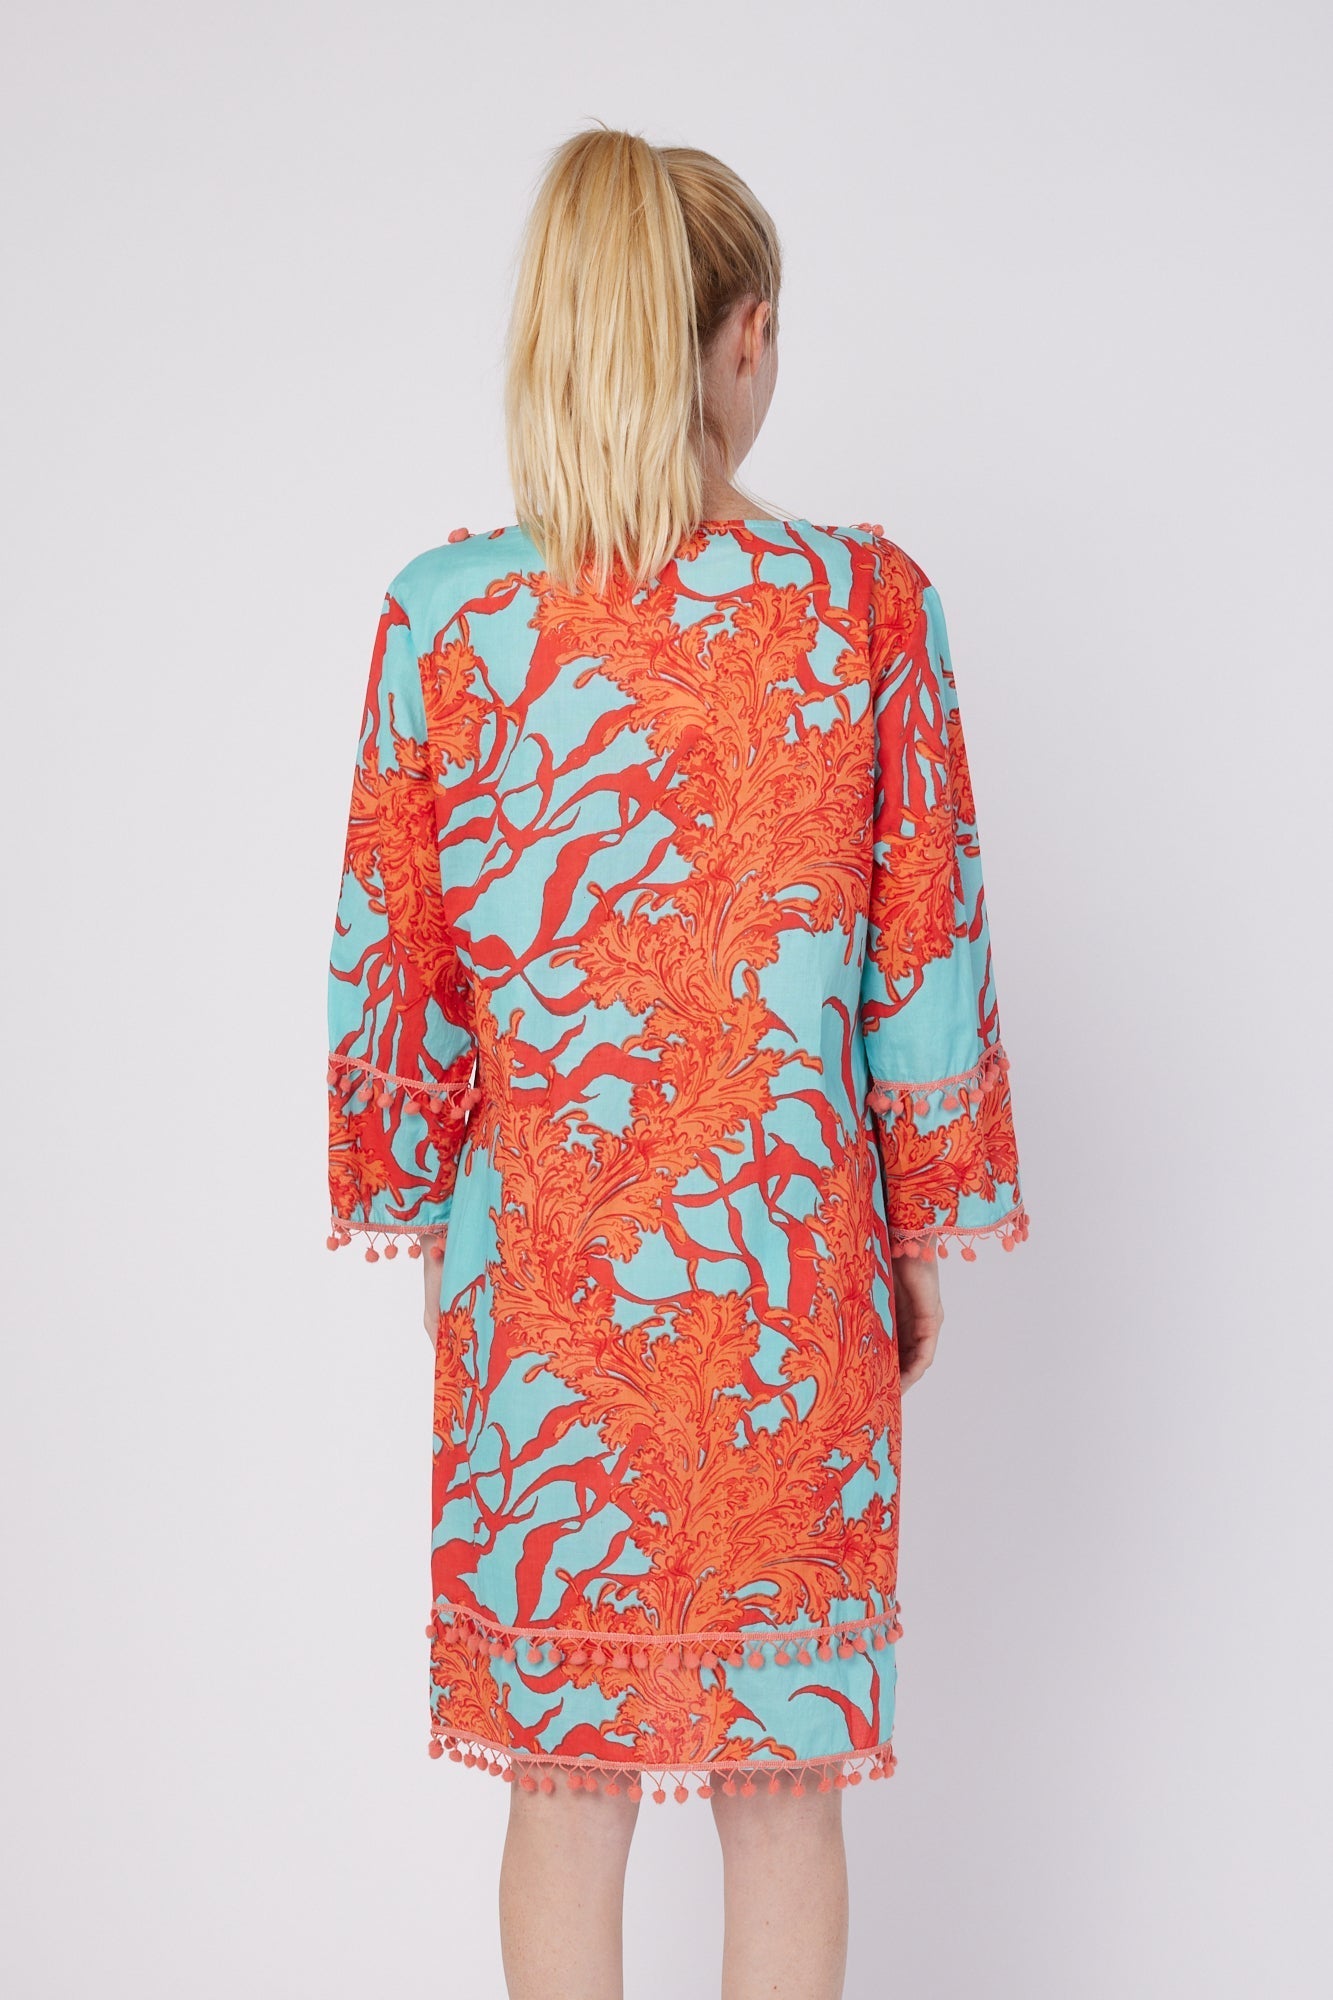 ModaPosa Pamela 3/4 Bell Sleeve V-Neck Pintuck Knee Length Dress with Pom Pom Trim in Turquoise Pink Coral . Discover women's resort dresses and lifestyle clothing inspired by the Mediterranean. Free worldwide shipping available!